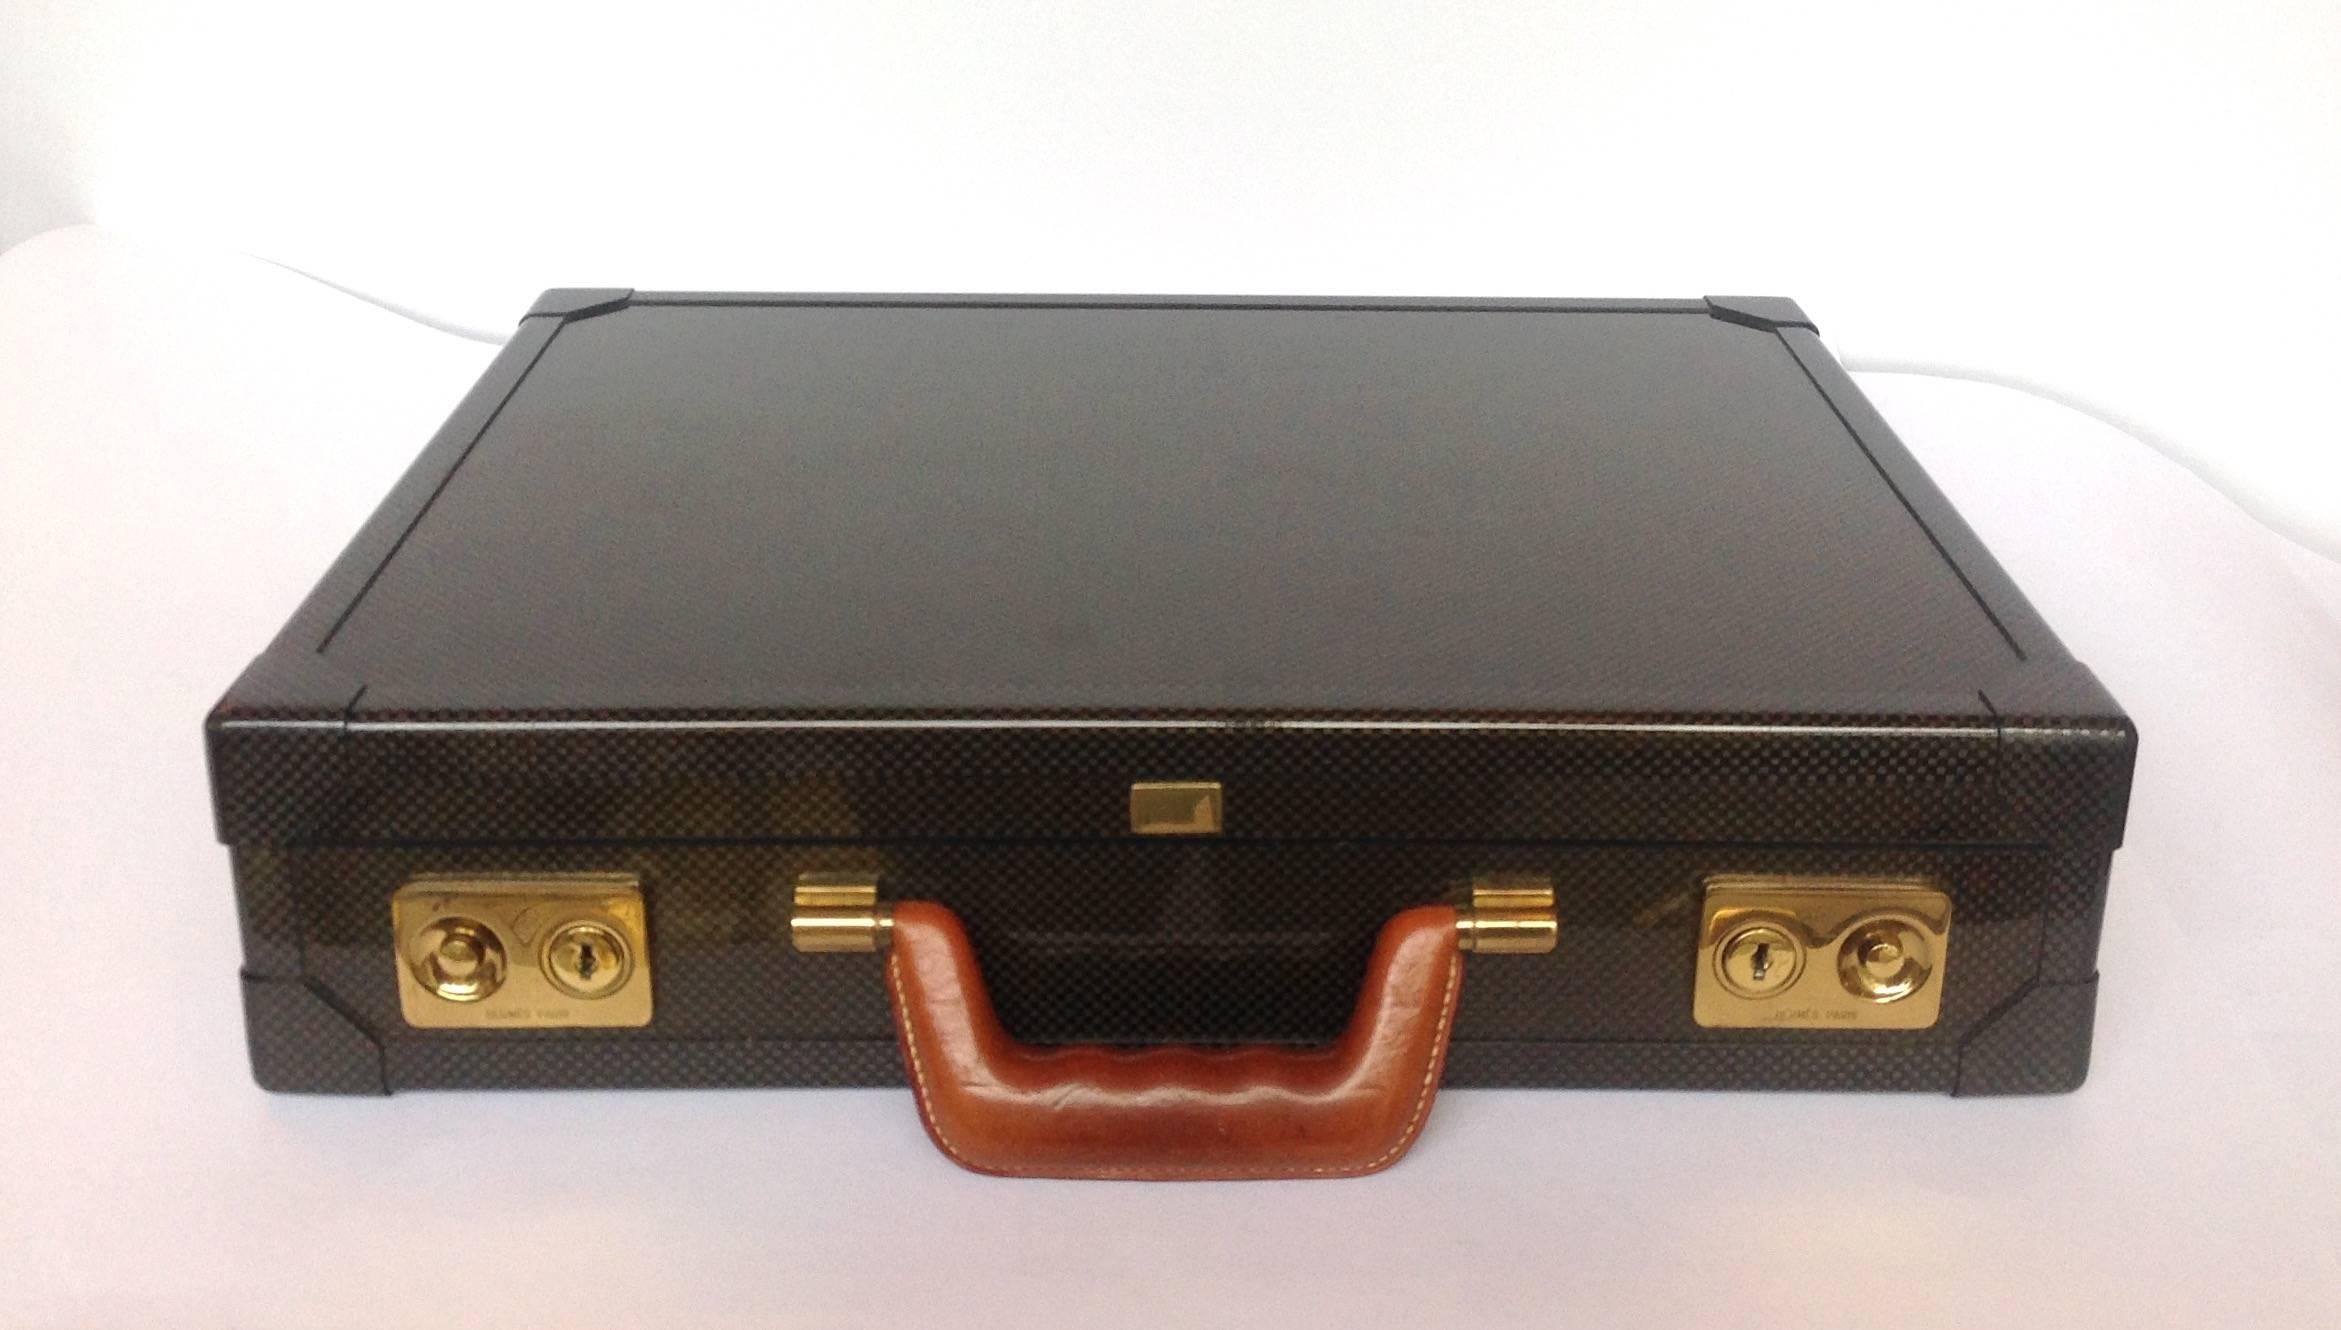 Hermes limited edition graphite attache brief case with 18-karat gold-plated hardware. The original retail price was $16,900. This was from a limited edition of 500 in 2008. It is constructed of a sleek graphite carbon fiber with an understated